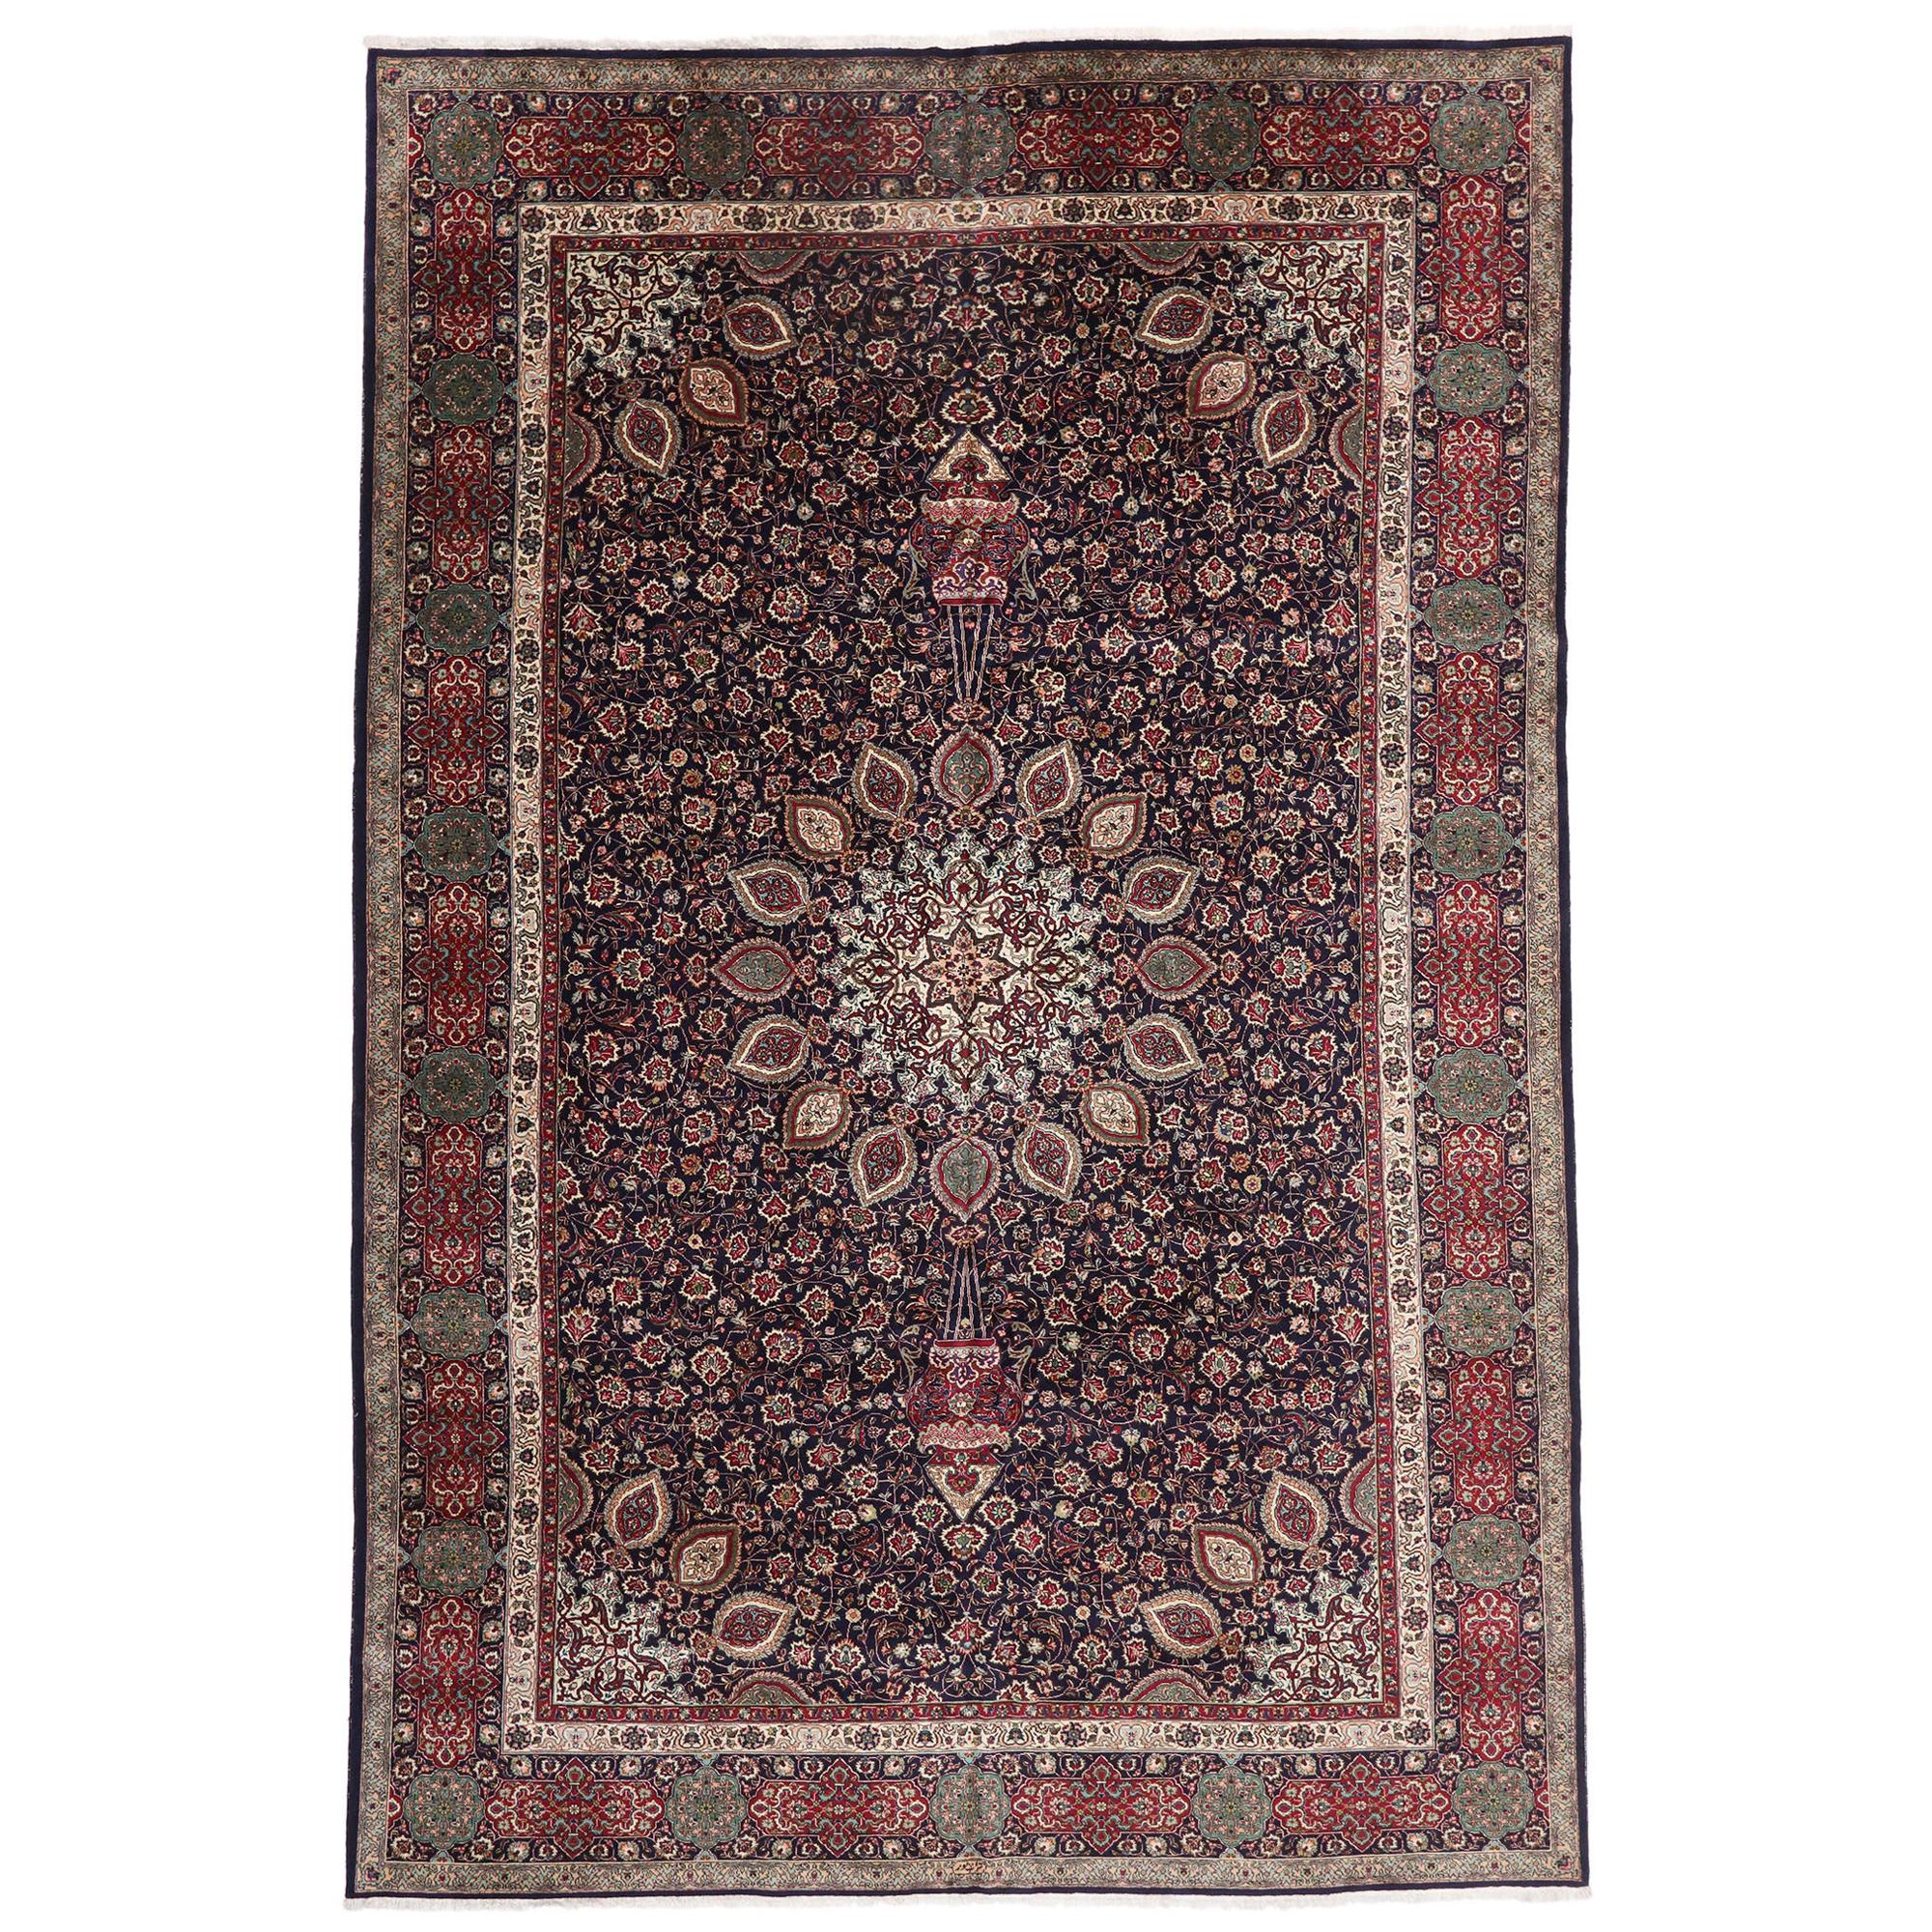 Vintage Persian Tabriz Palace Size Rug with The Ardabil Carpet Design